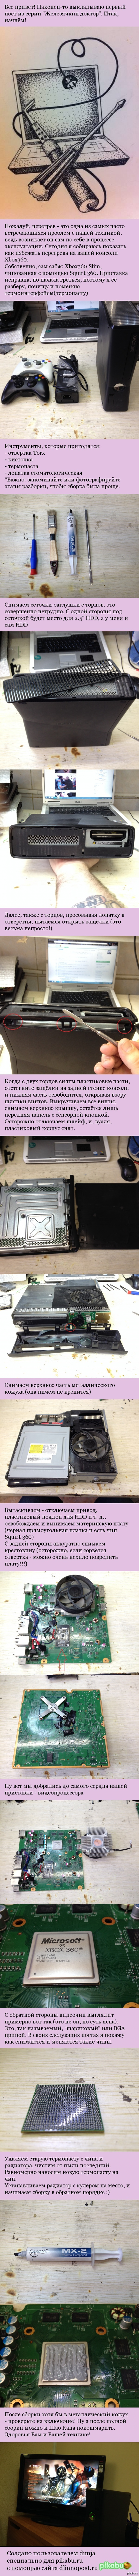 Iron Doctor Xbox360 Disassembly and Cleaning (long post) - My, Repair of equipment, Laptop Repair, Xbox 360, Computer, Longpost